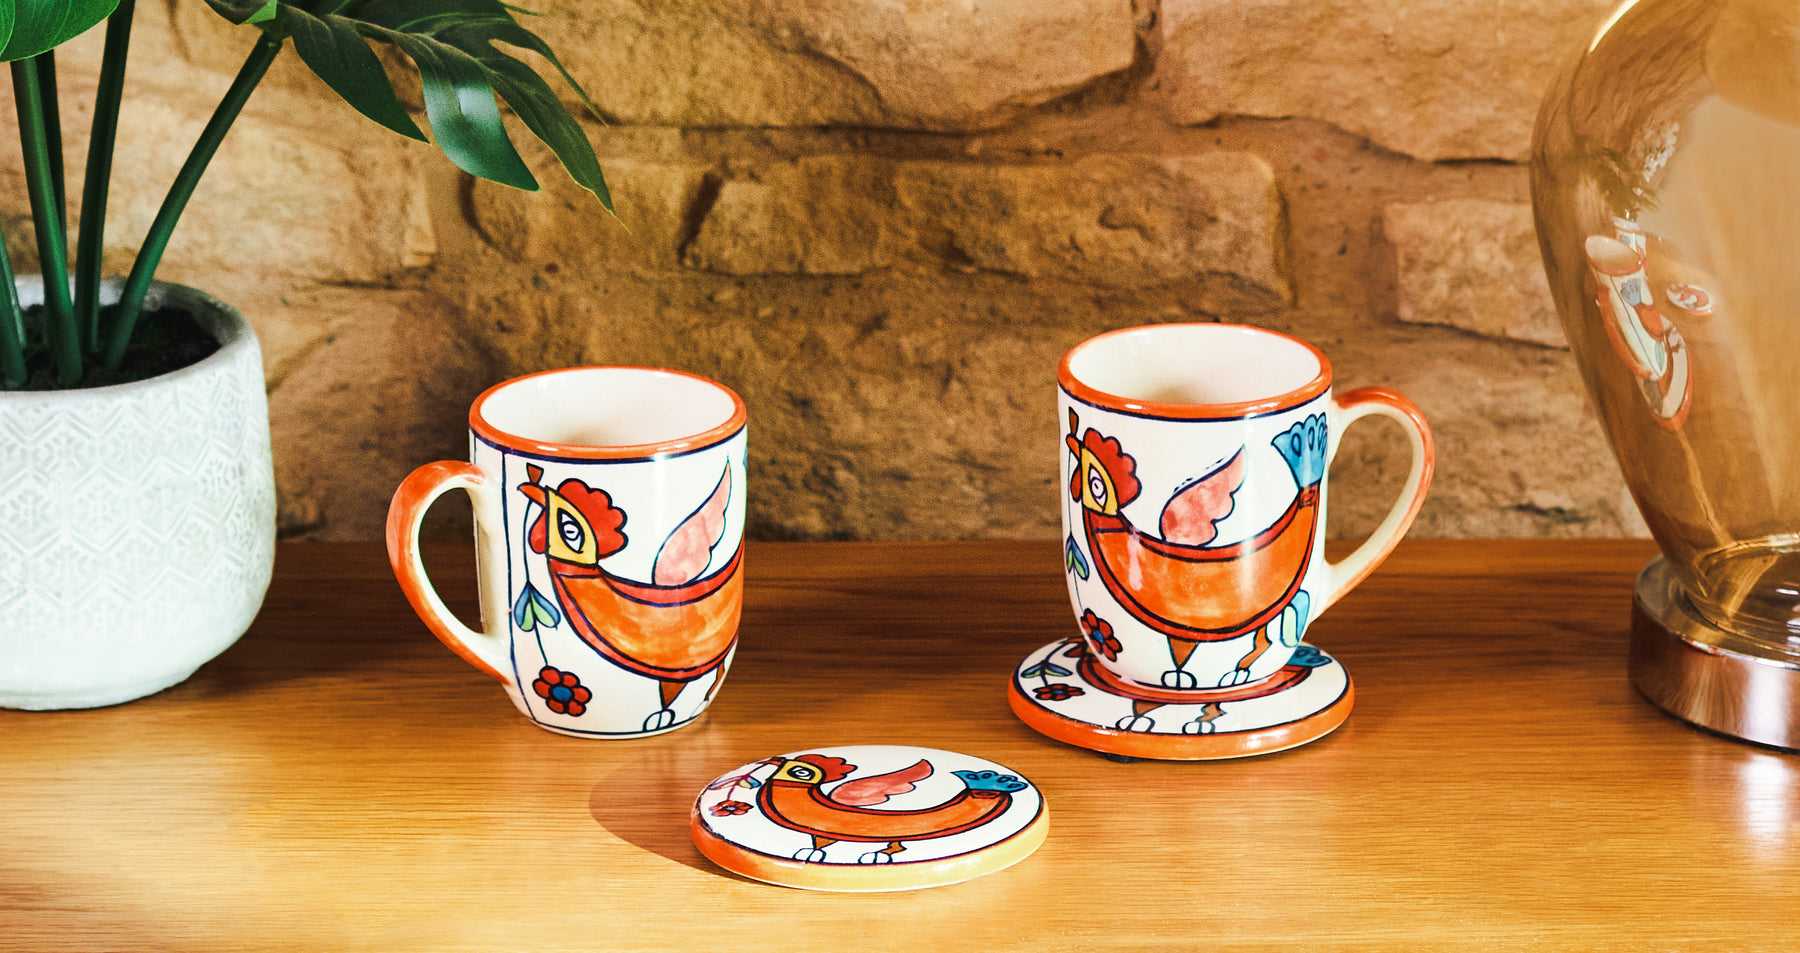 Introducing Our New Hand-Painted Ceramics